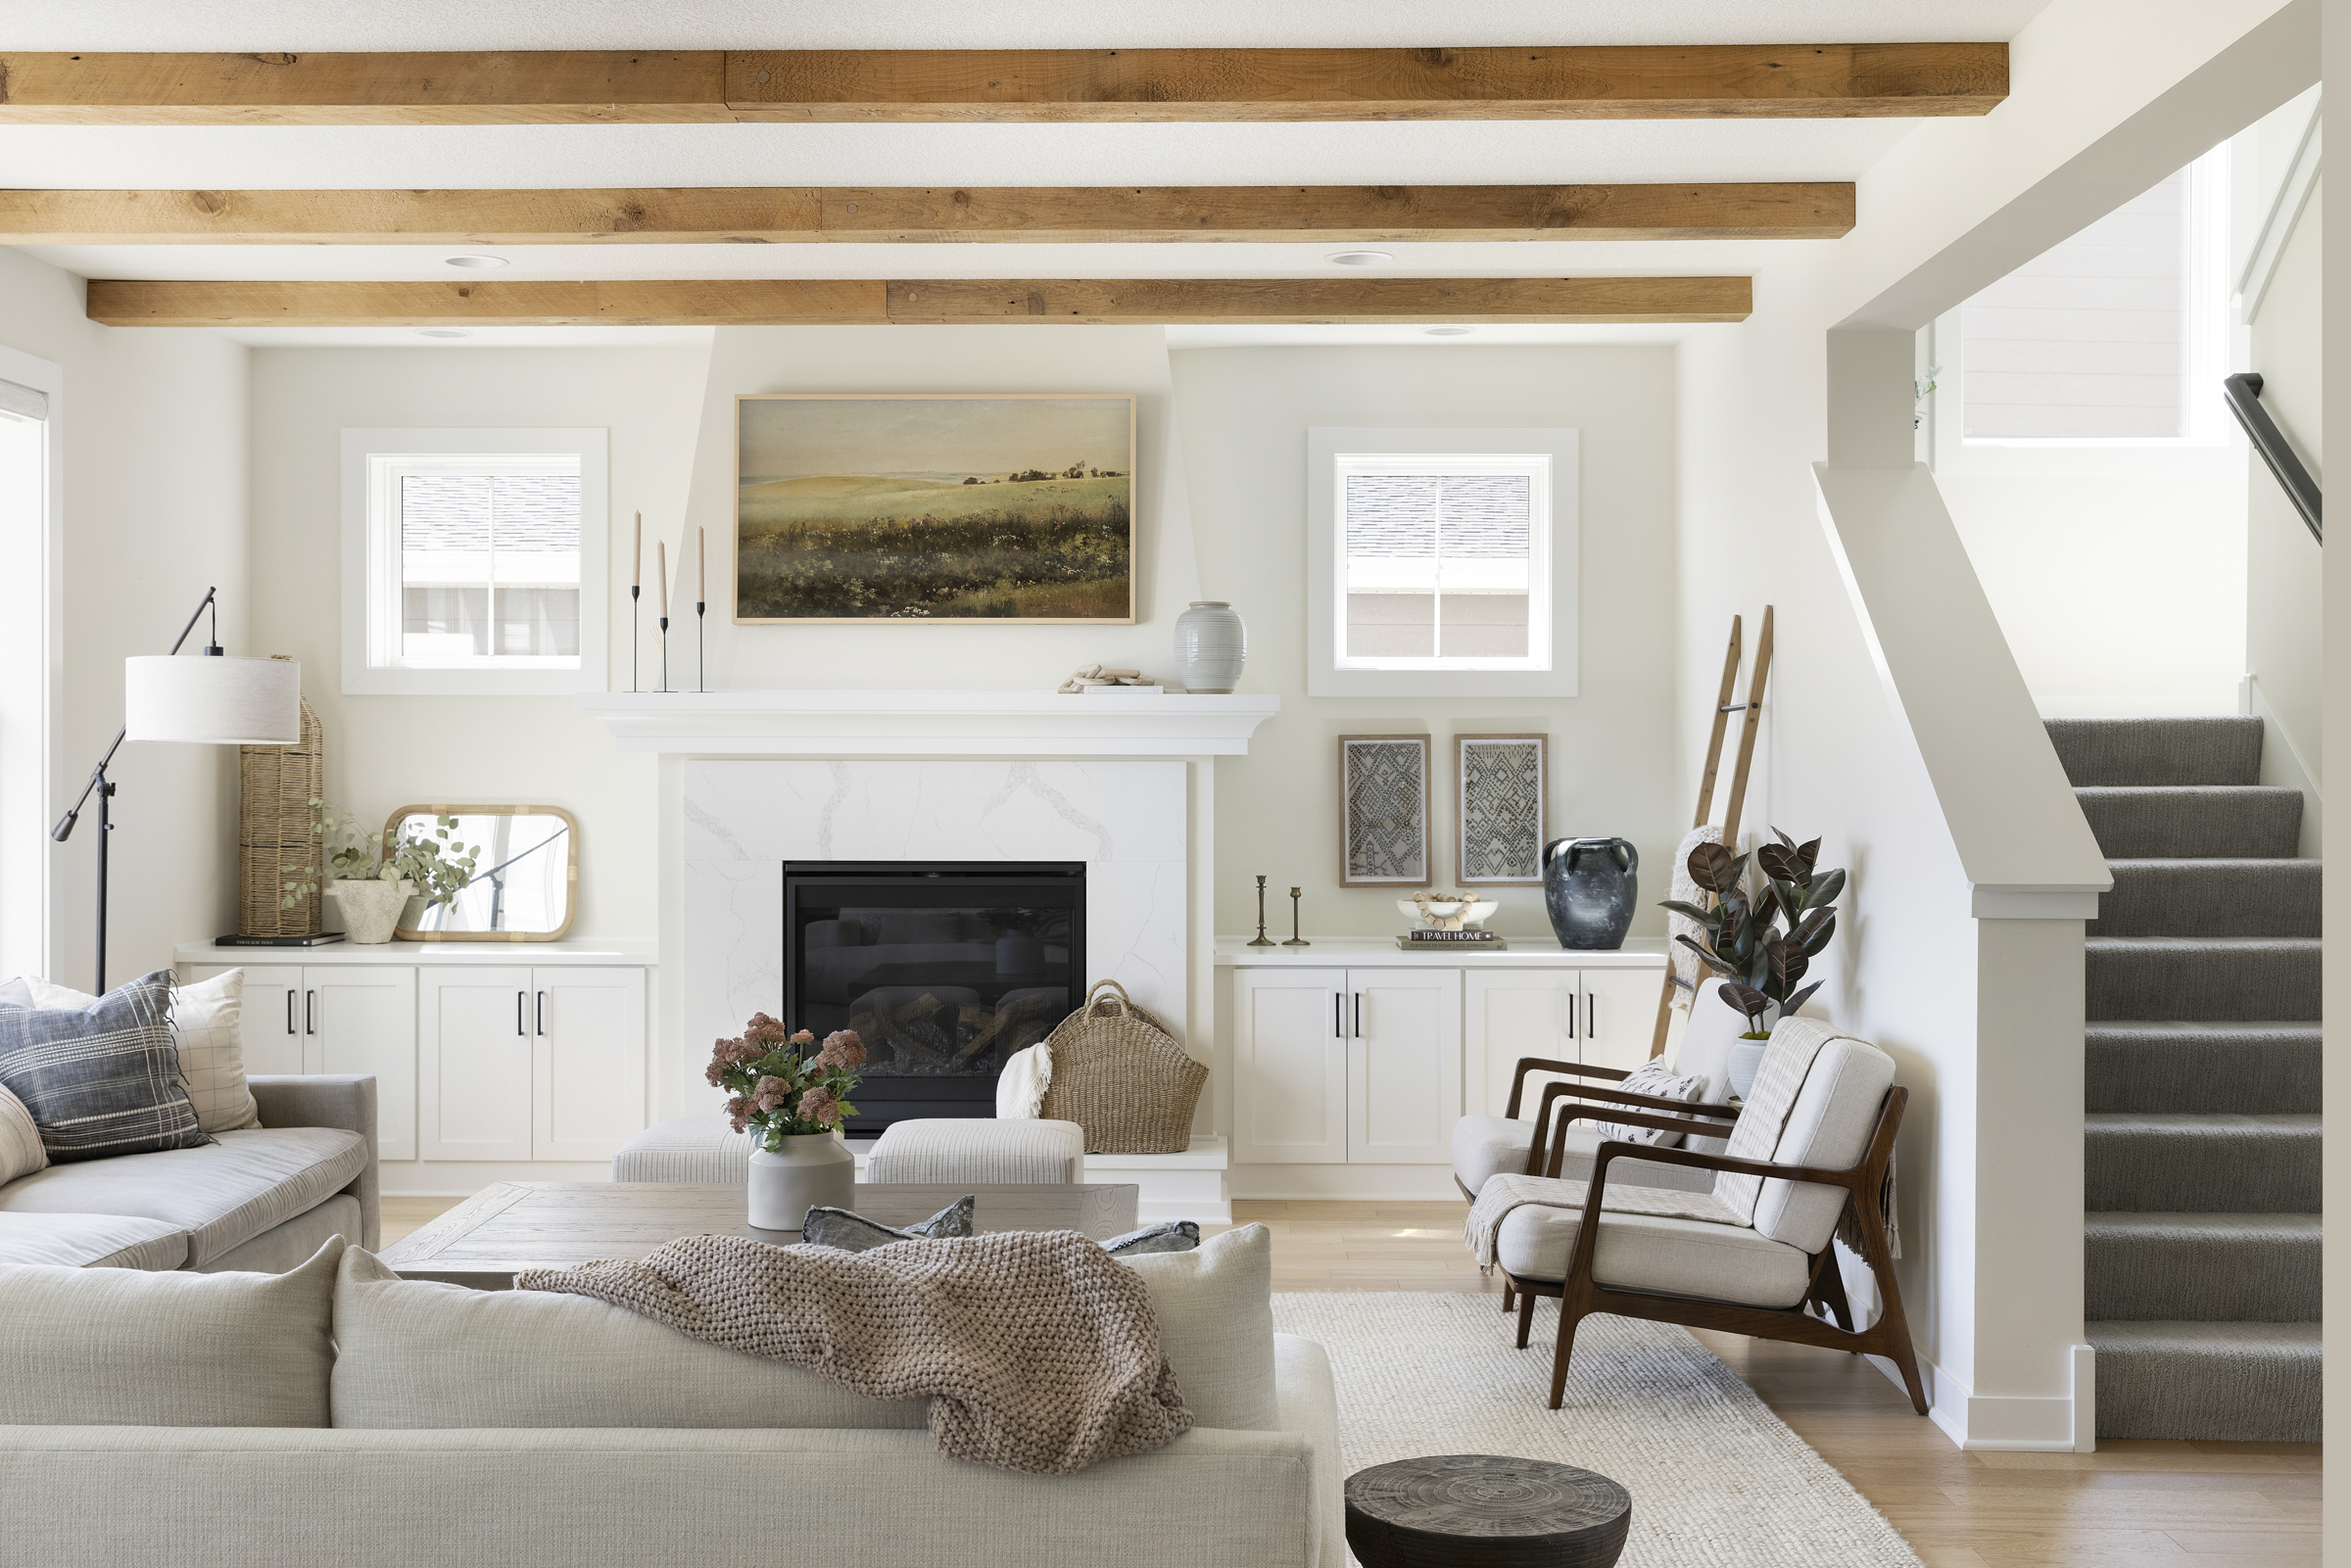 The Art of Styling Homes 3